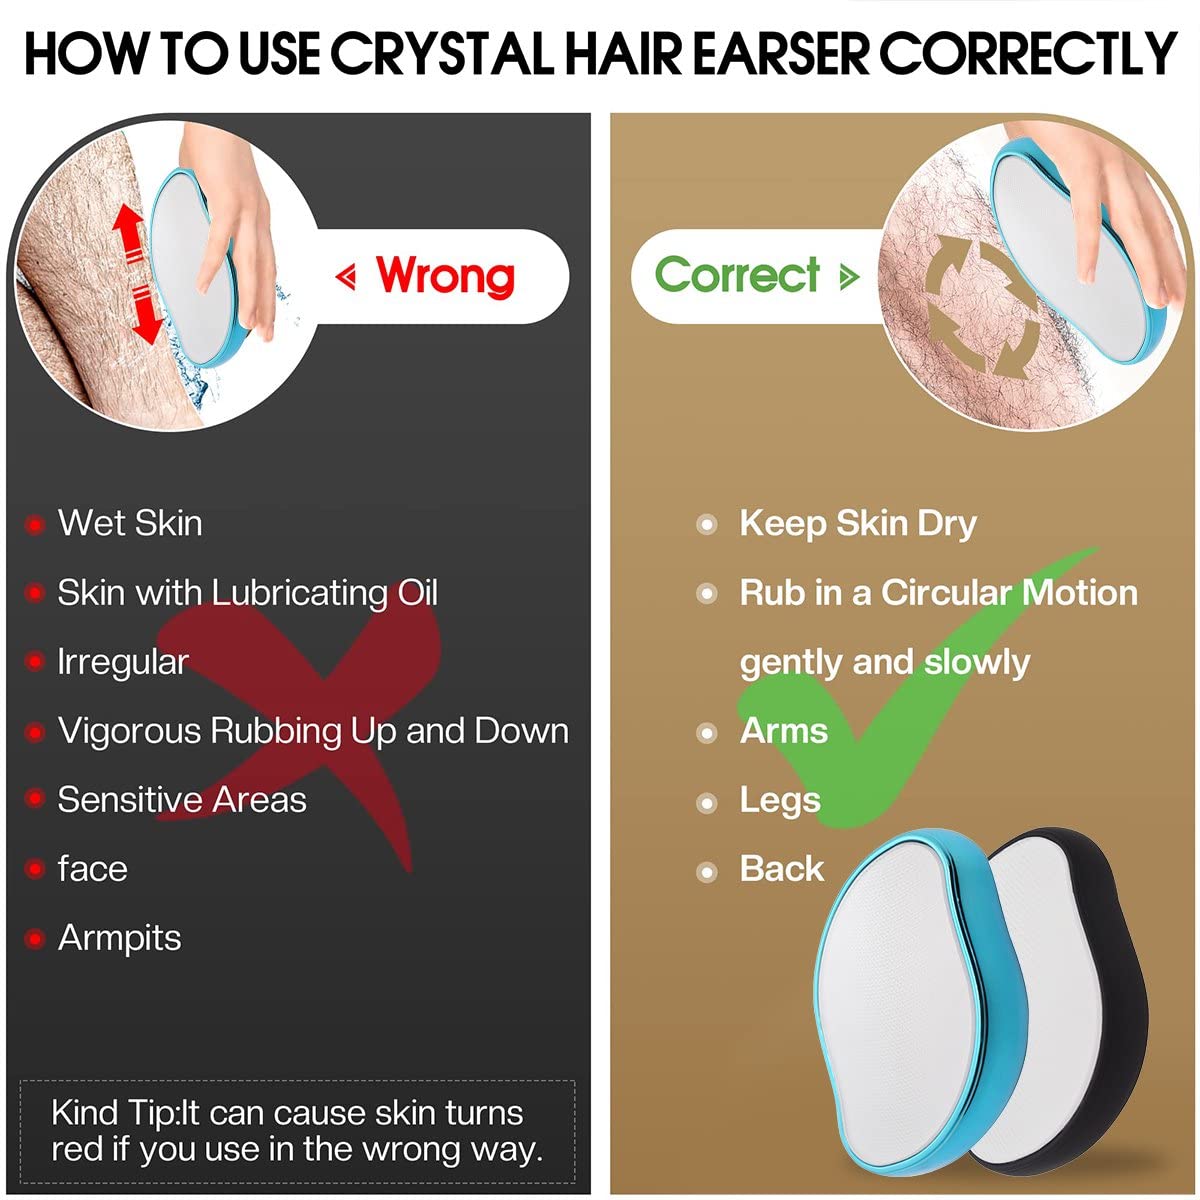 Crystal Hair Eraser & Women and Men, Magic Hair Eraser Crystal Hair Remover, Painless Exfoliation Hair Removal Tool for Arms Legs Back - Reusable and Washable, Stone Hair Remover